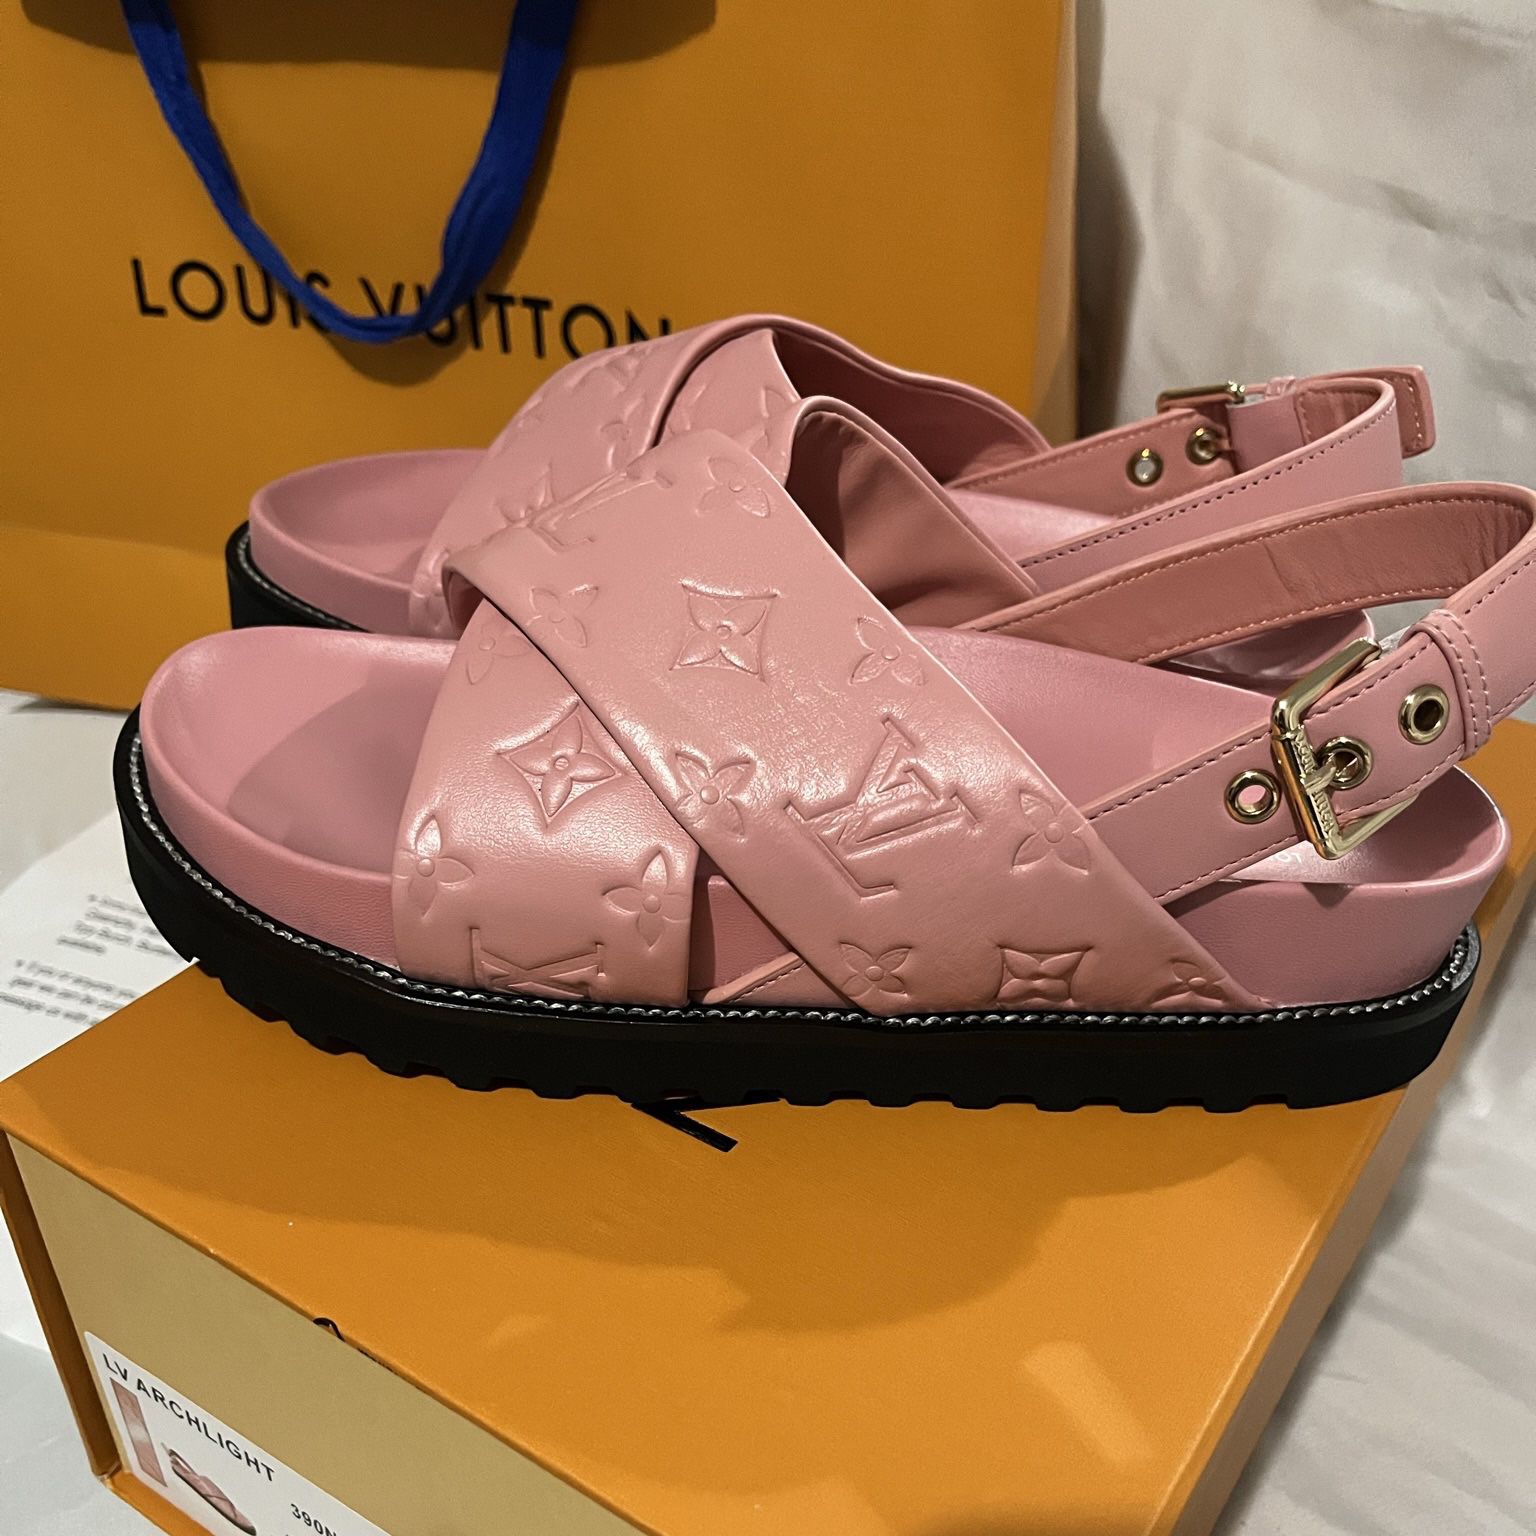 Louis Vuitton Paseo Flat Comfort Sandal in Rose - Shoes 1A90PY